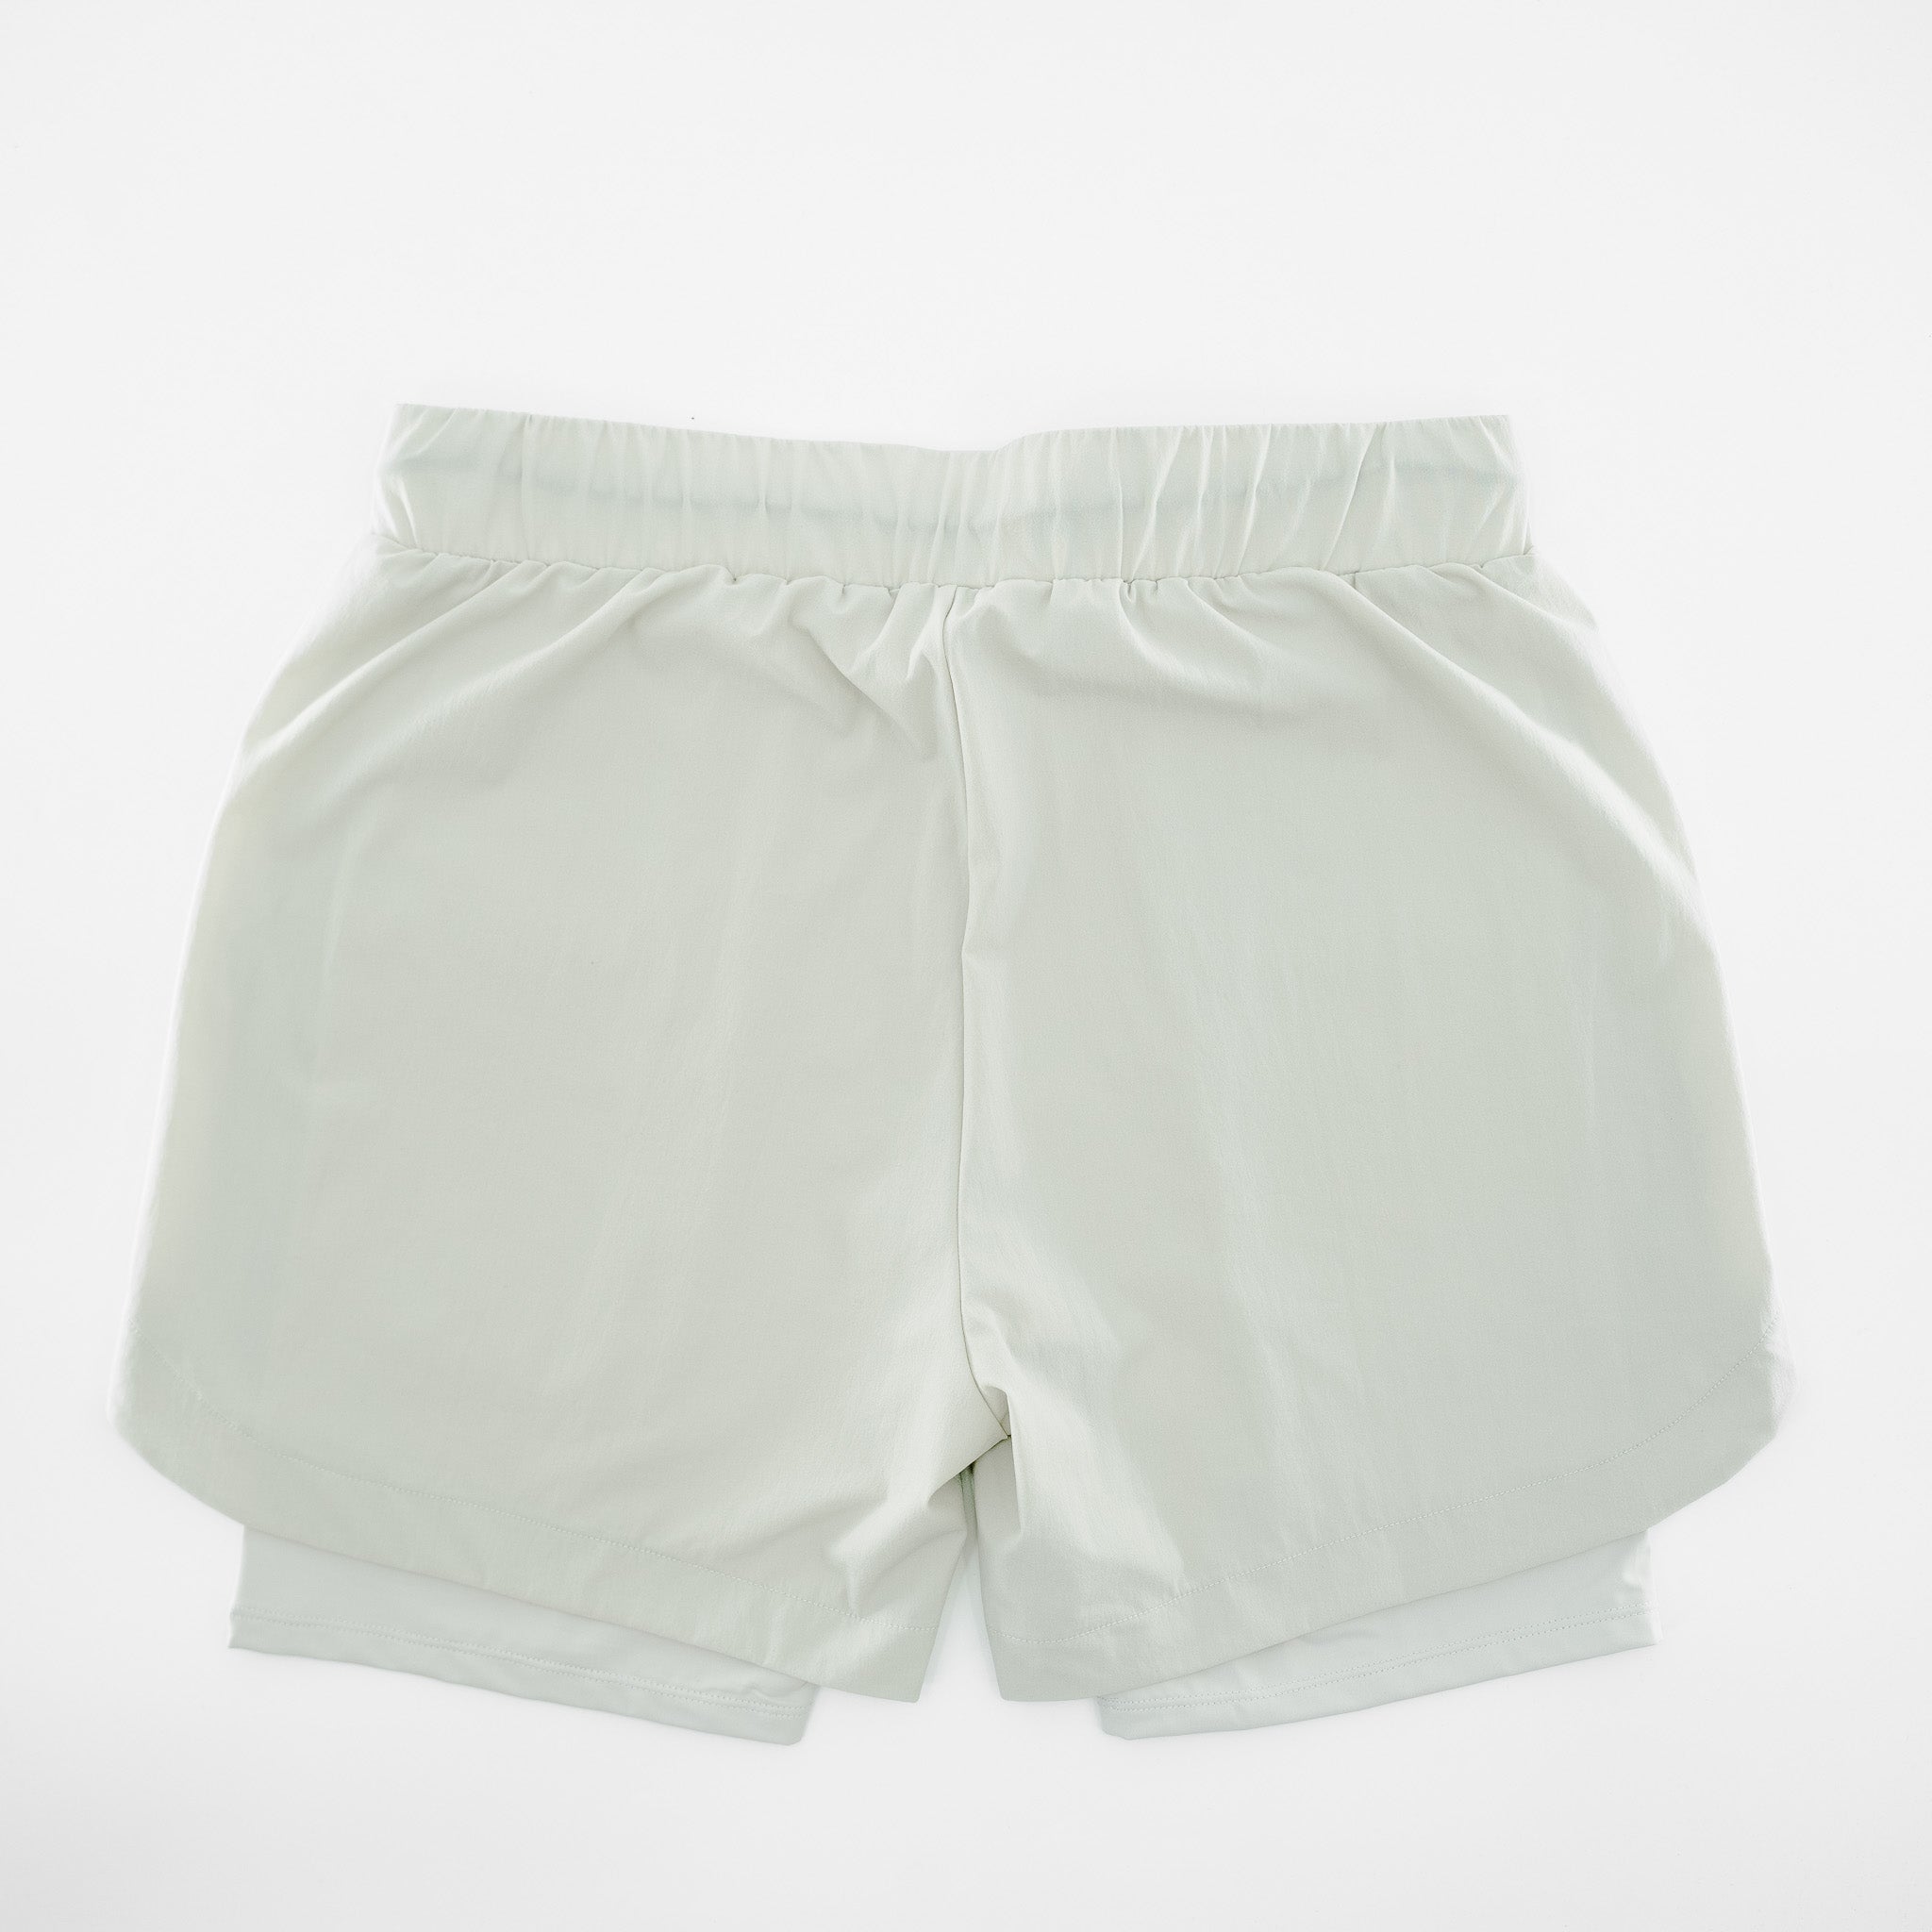 Tech Shorts Lined 5